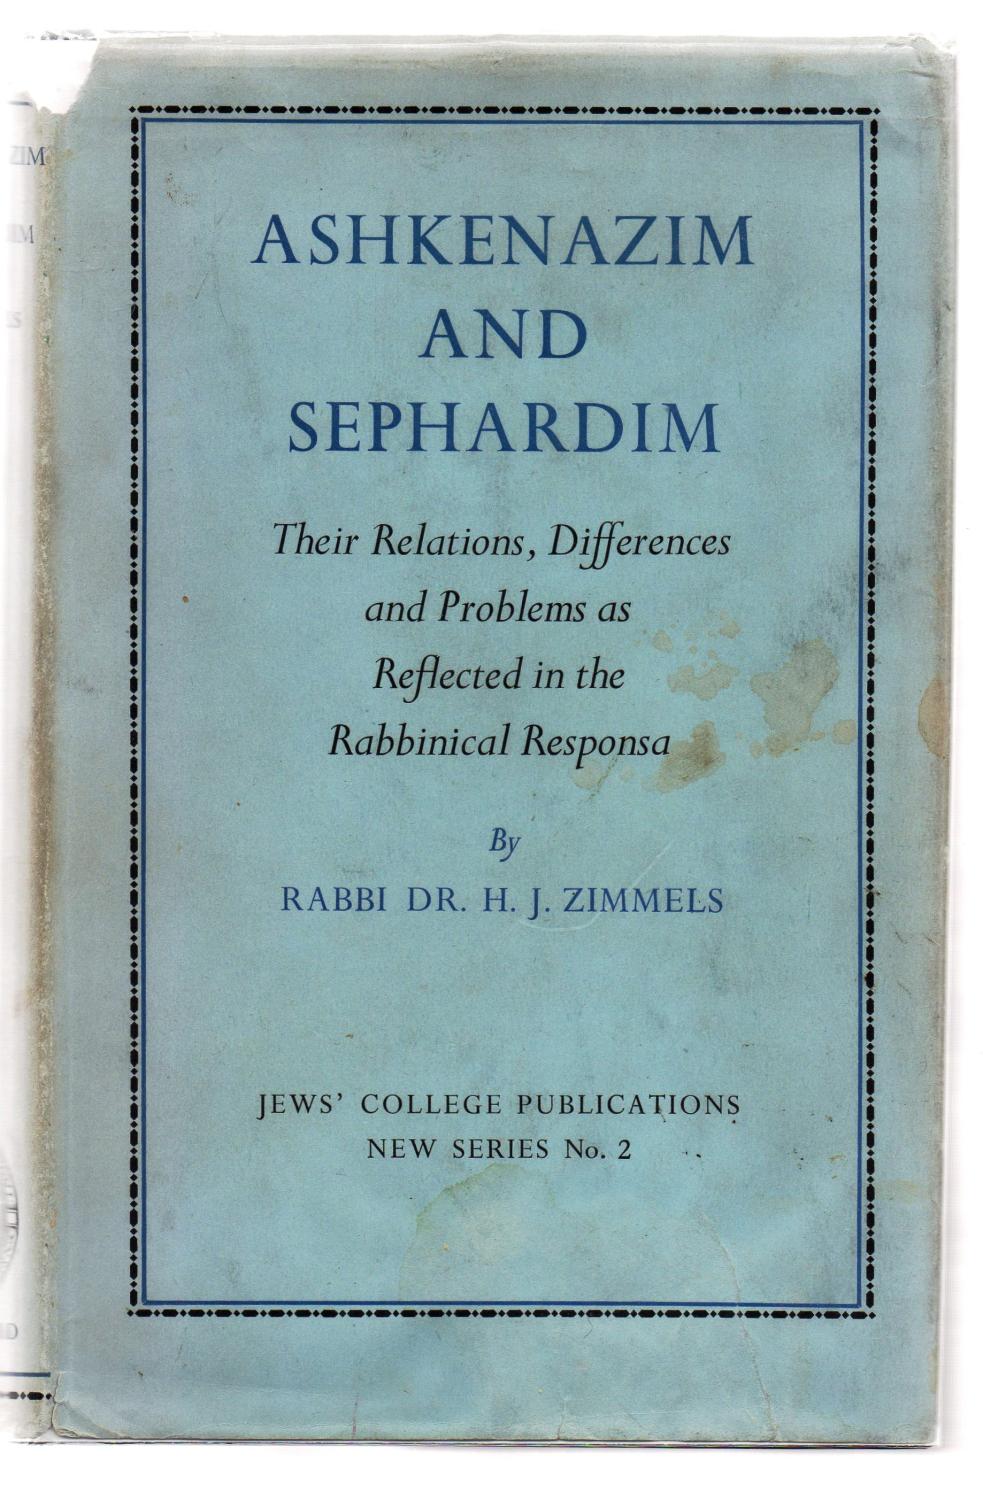 Ashkenazim and Sephardim: Their Relations, Differences and Problems as Reflected in the Rabbinical Responsa - ZIMMELS, Rabbi Dr. H. J.